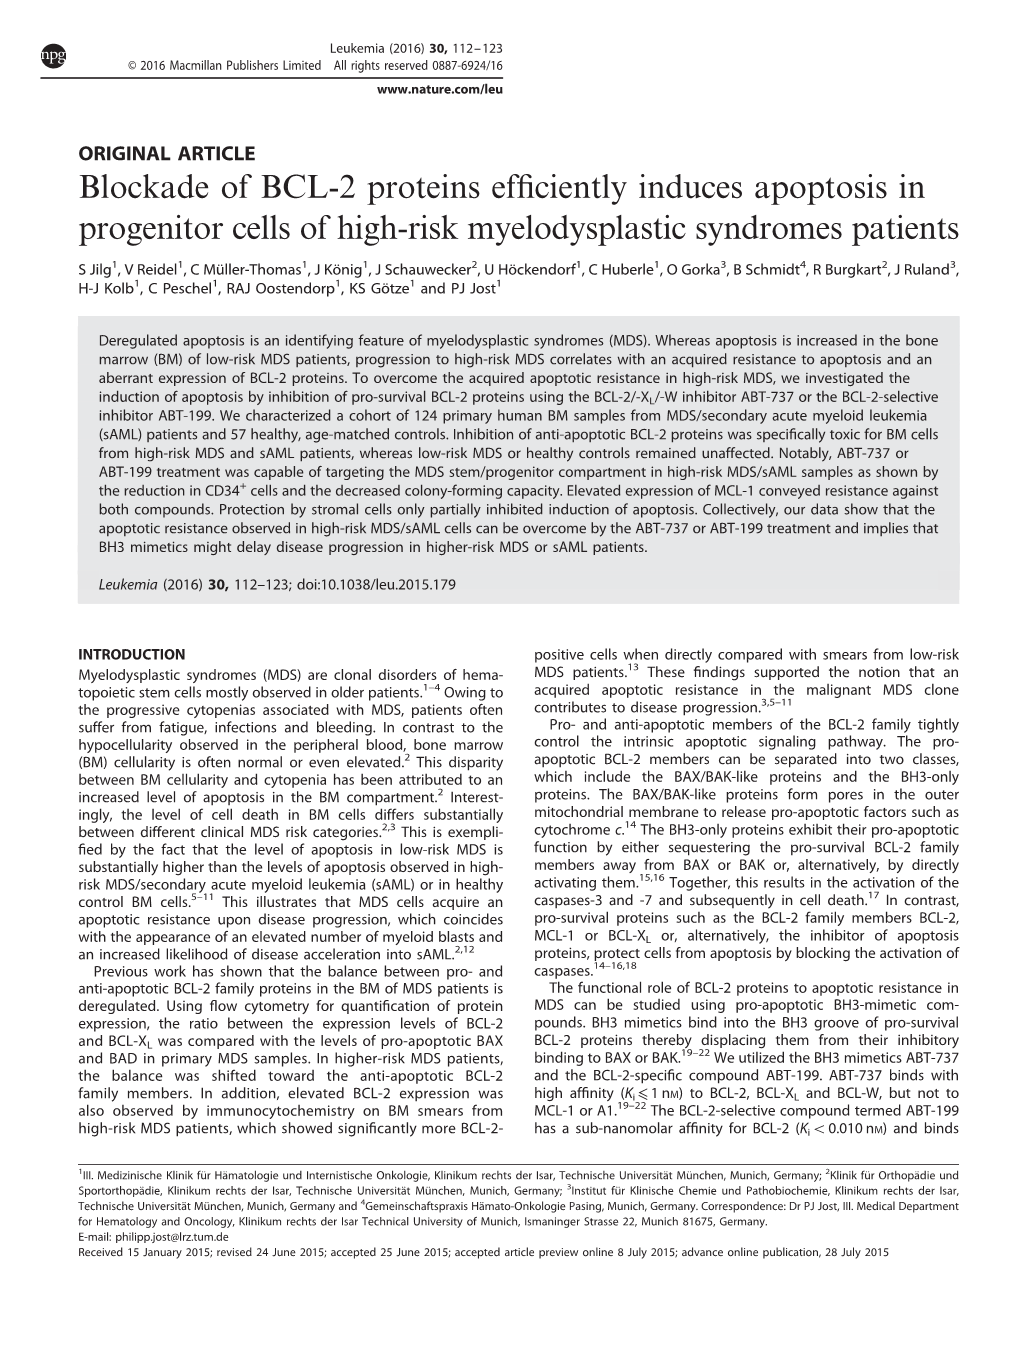 Blockade of BCL-2 Proteins Efficiently Induces Apoptosis in Progenitor